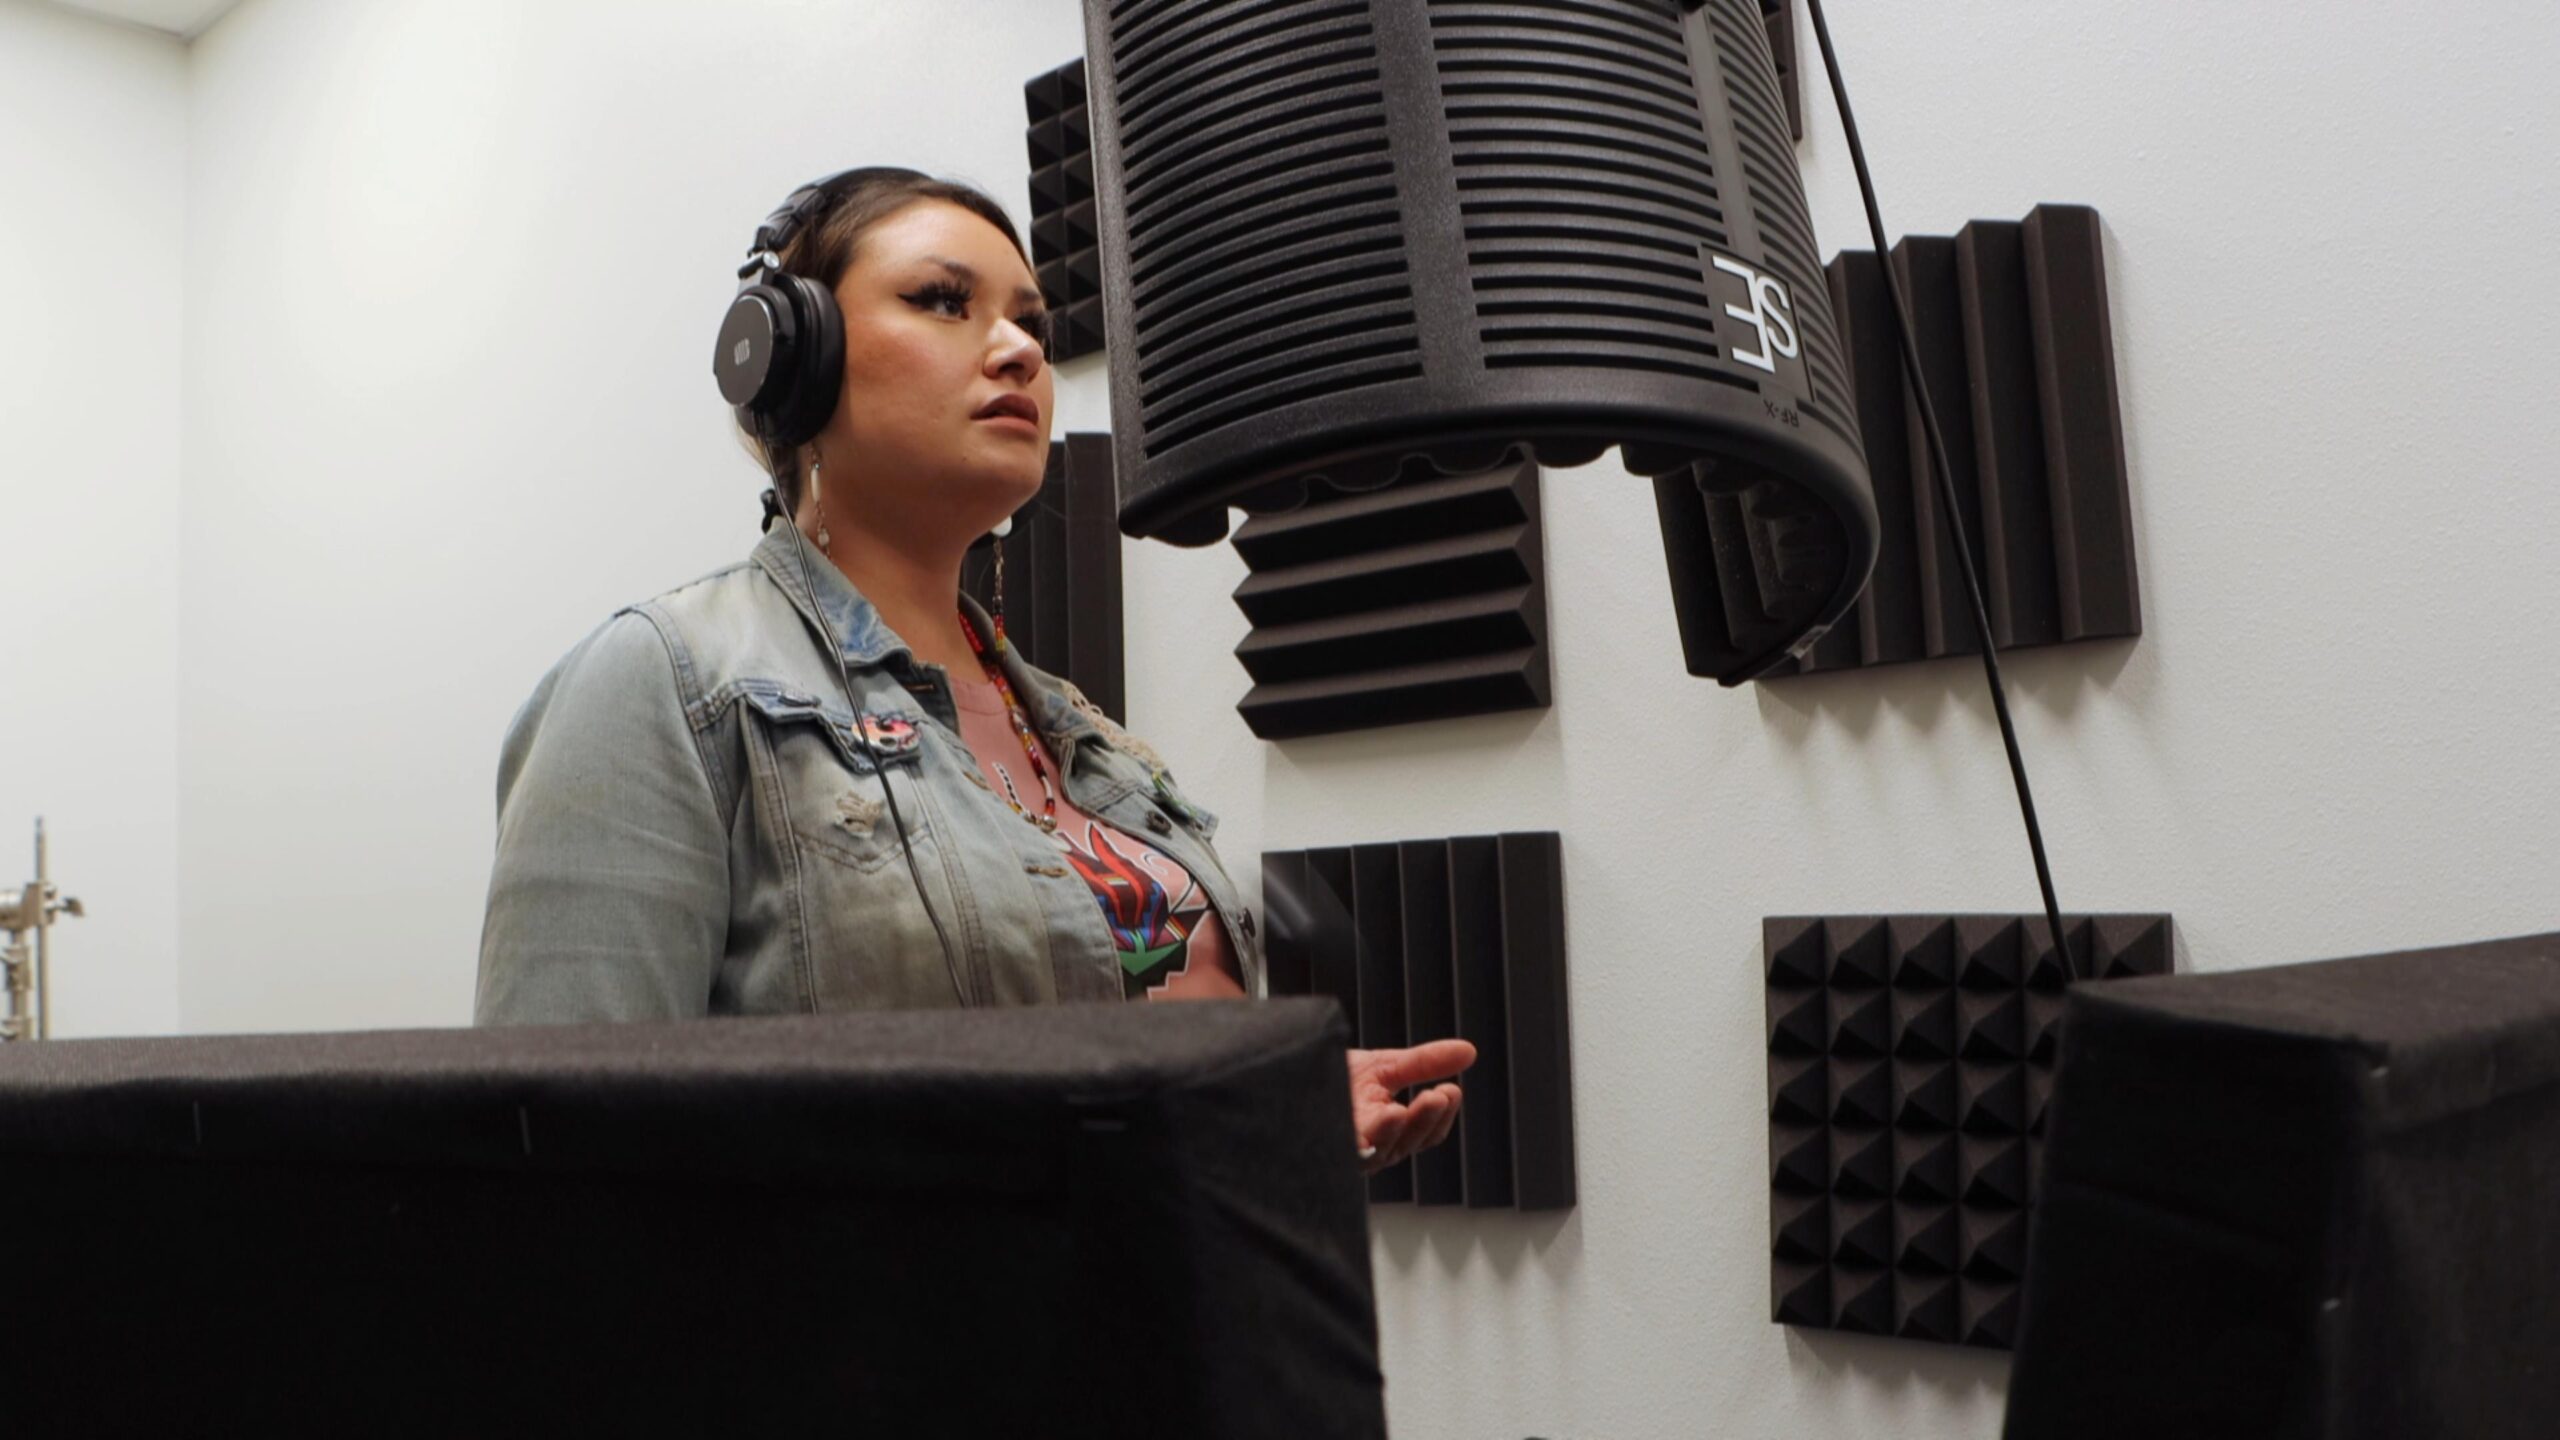 A person in a jean jacket stares at recording equipment in front of their mouth in a sound booth. Their mouth is slightly open and they might be talking or singing.